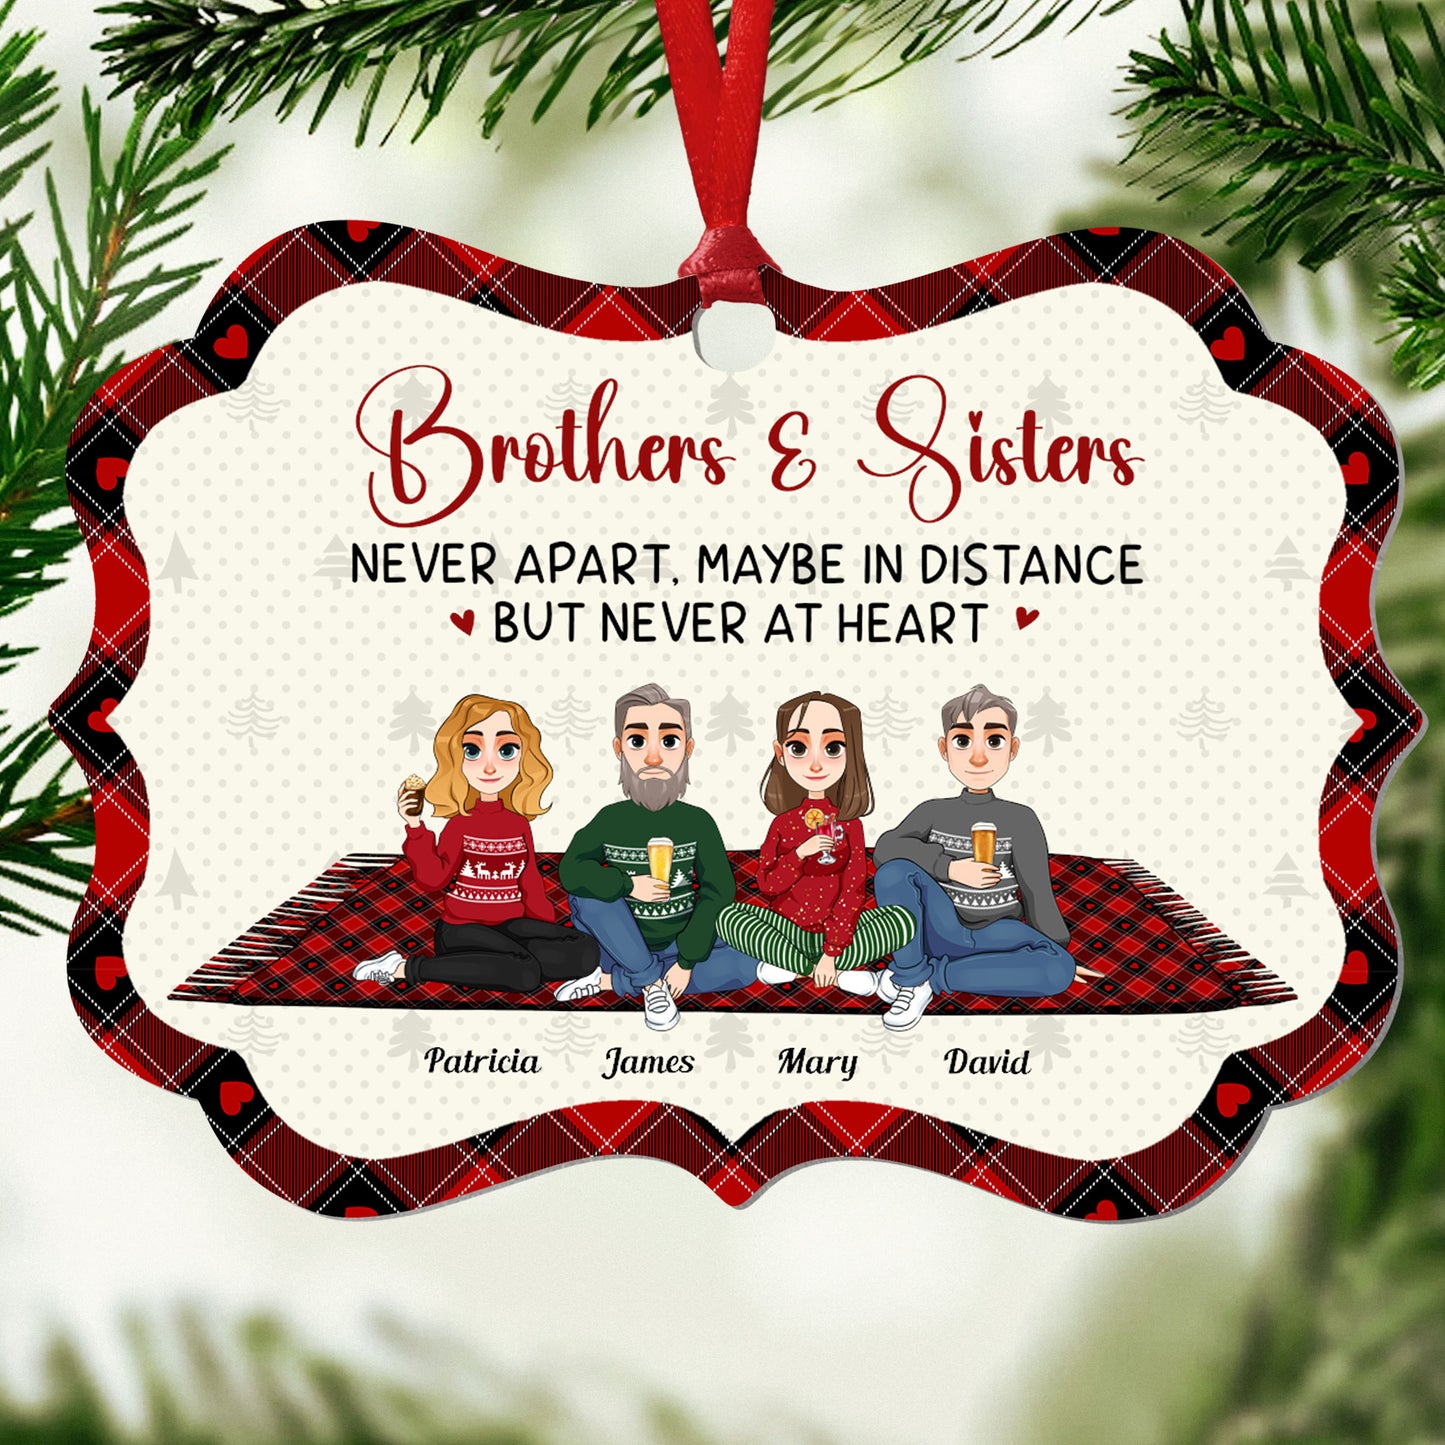 Brothers & Sisters Never Apart - Personalized Aluminum Ornament